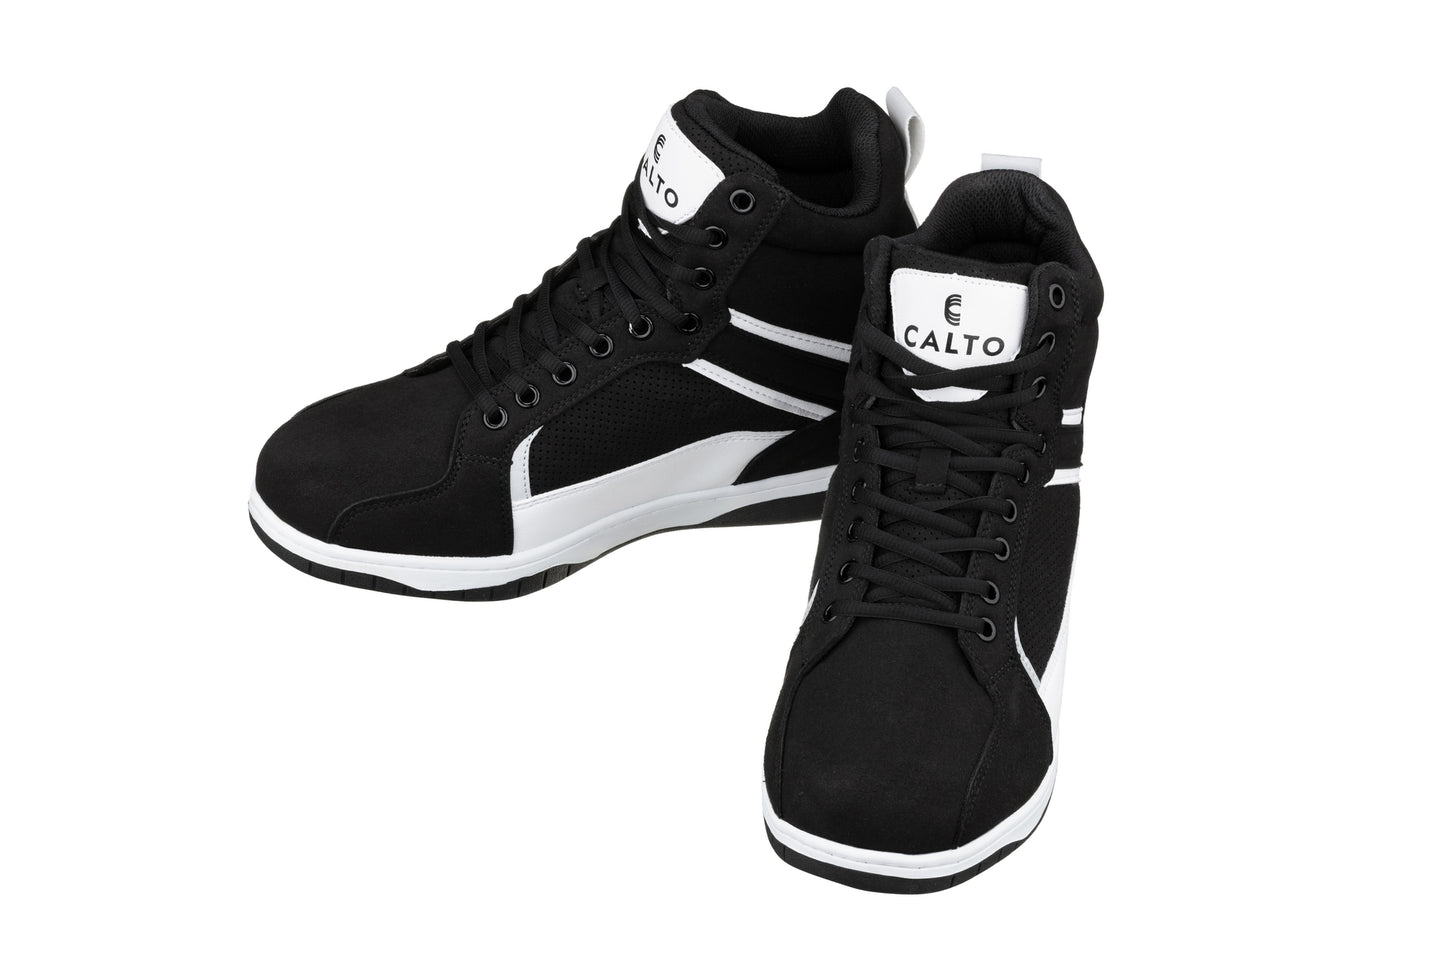 Elevator shoes height increase CALTO - S3720 - 3.2 Inches Taller (Black/White) - Sneakers